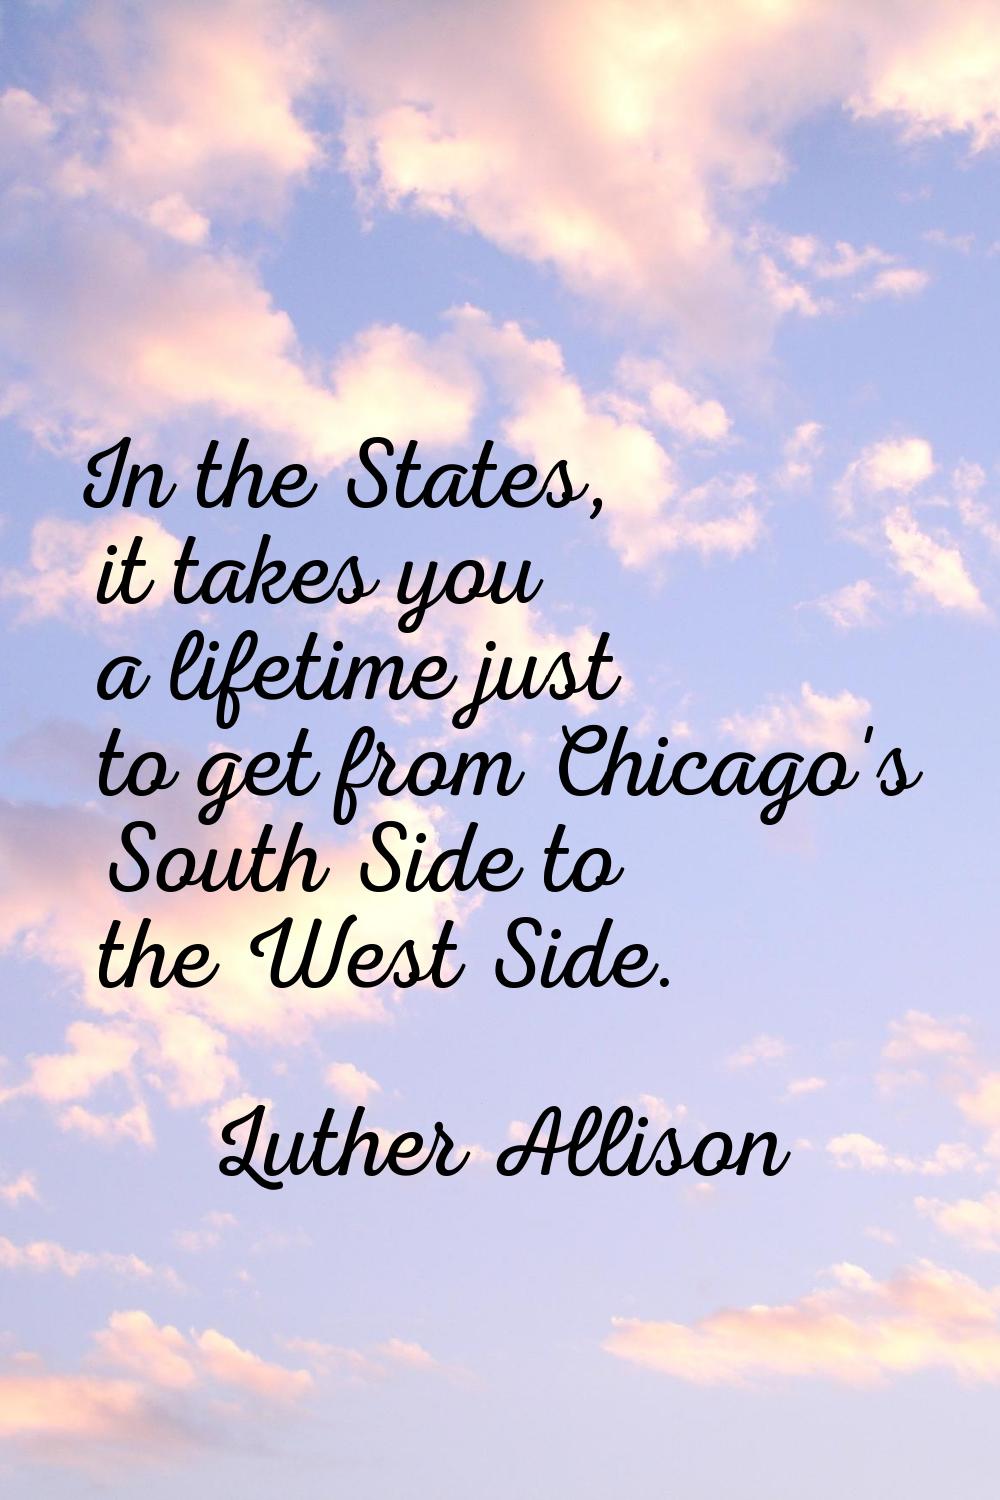 In the States, it takes you a lifetime just to get from Chicago's South Side to the West Side.